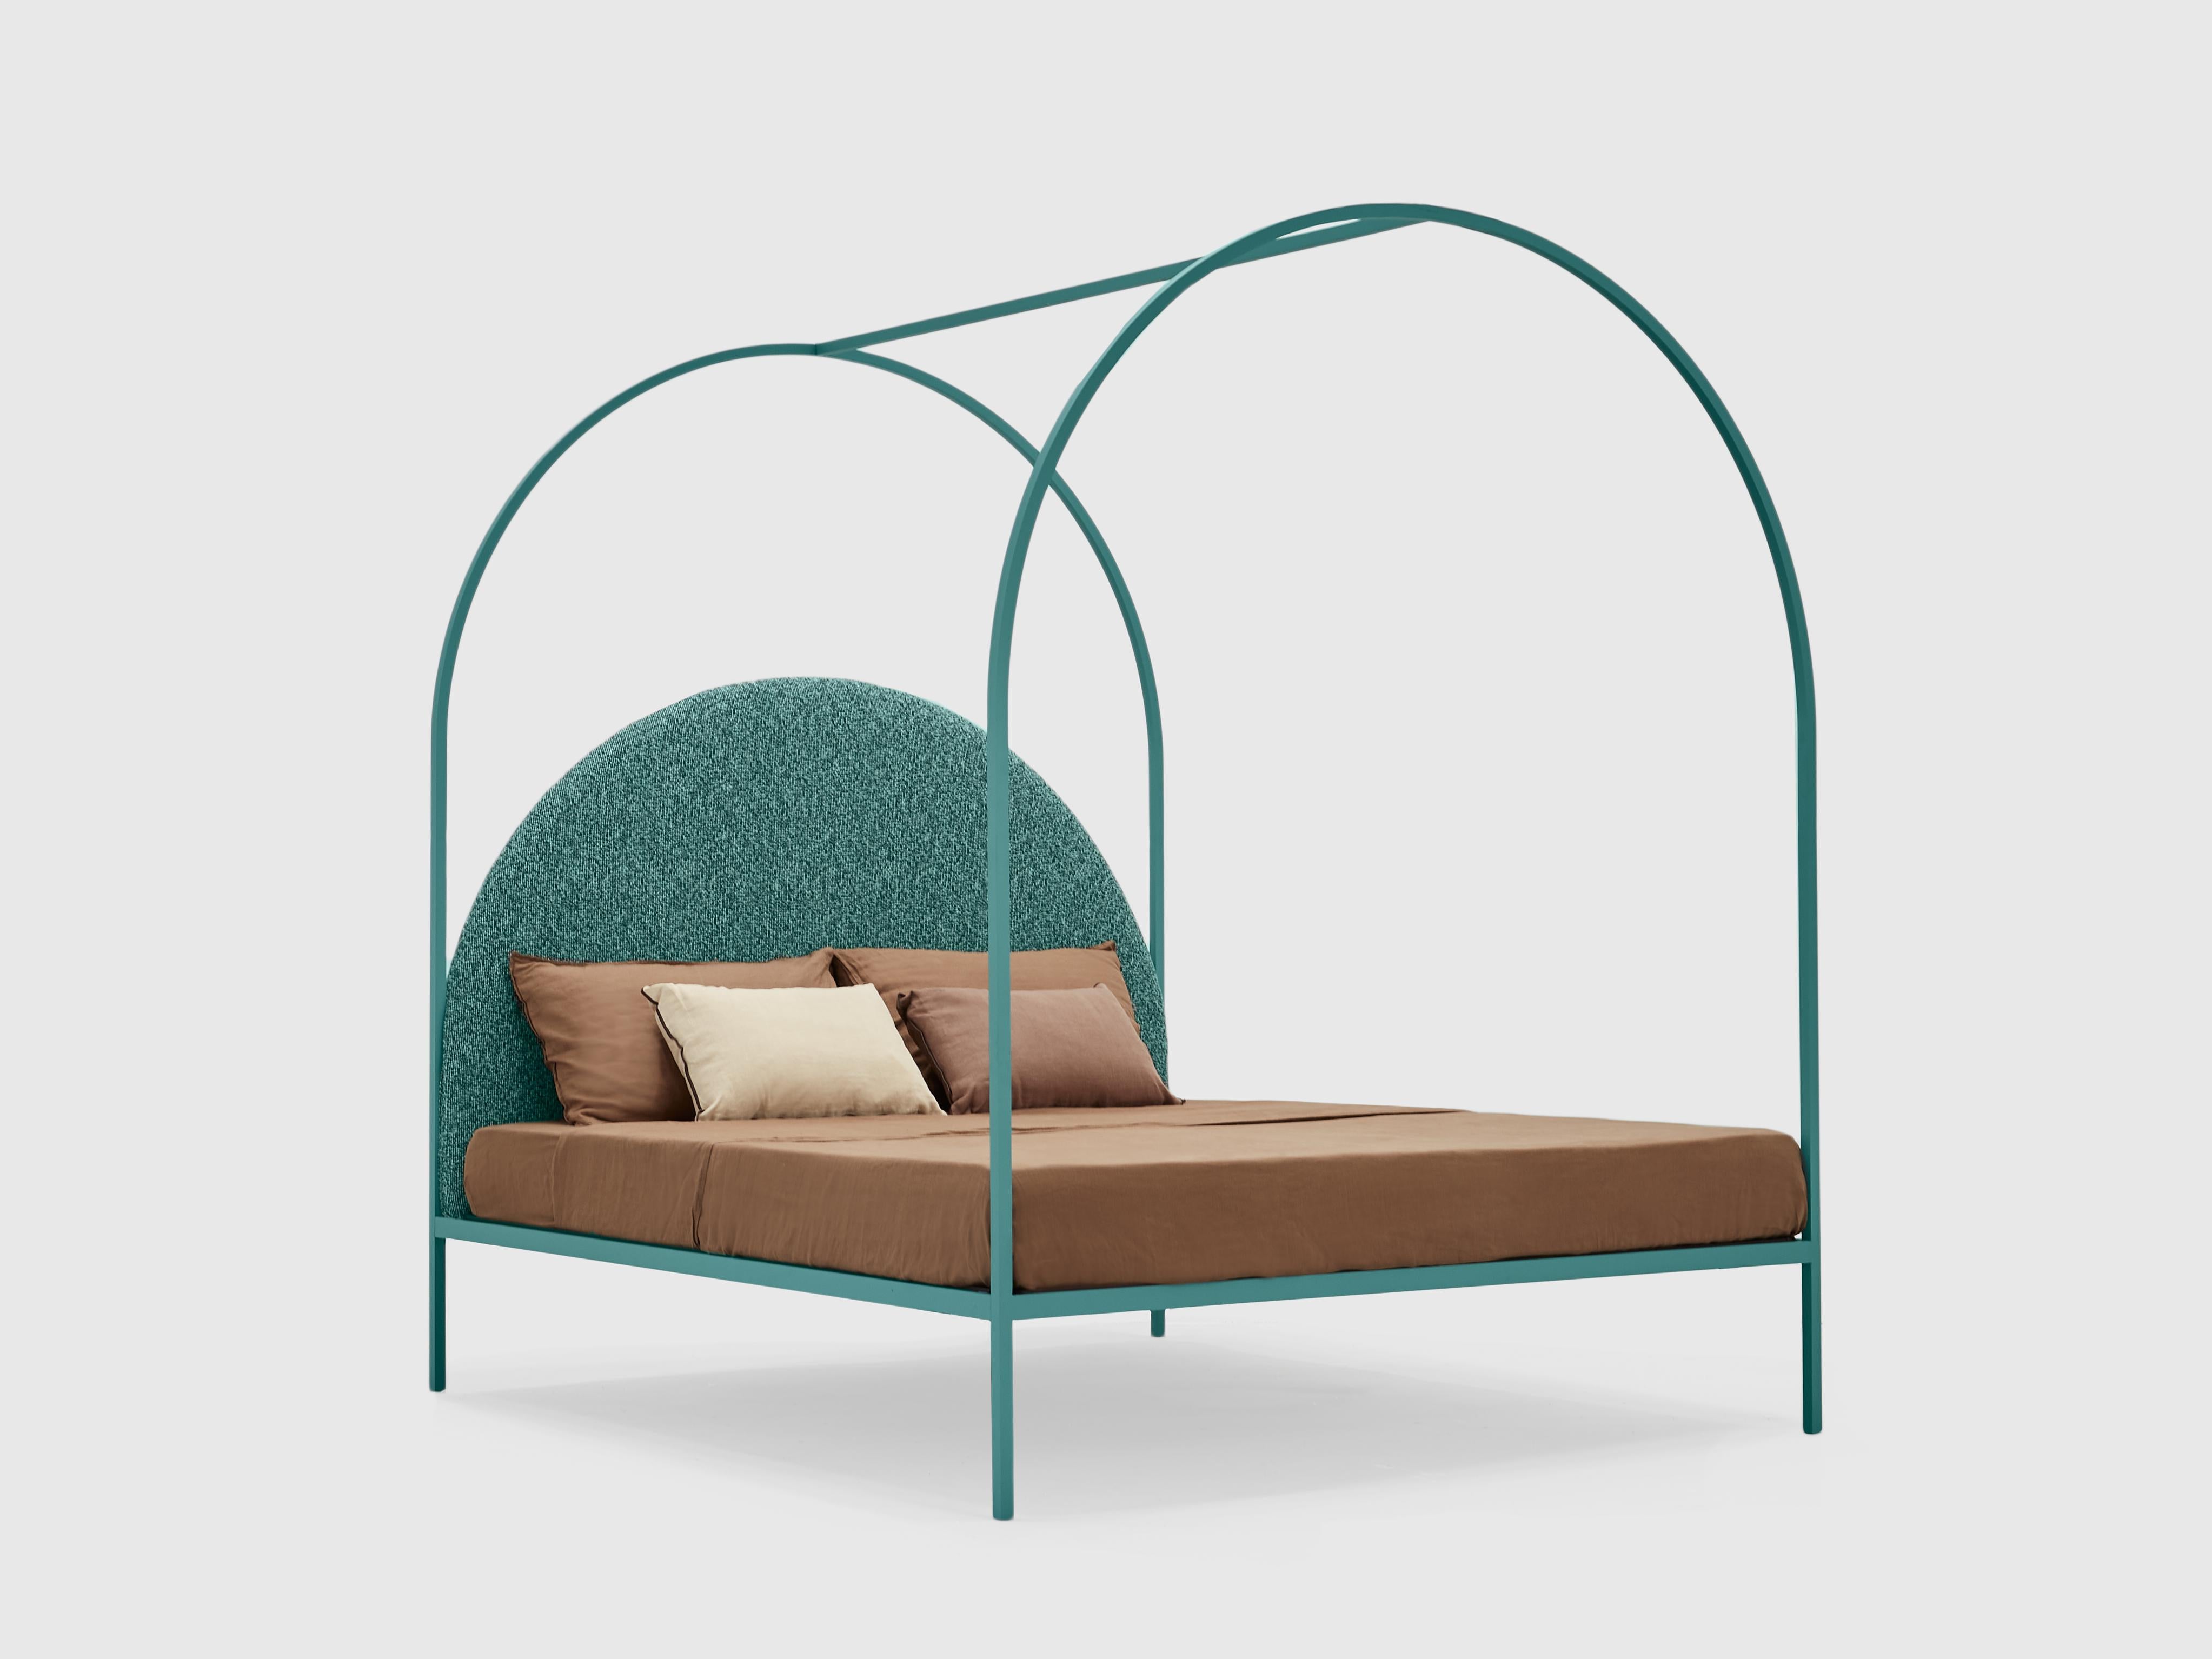 The concept of a four-poster bed in the modern age: absolute, exact, abstract, precise. Like a line that moves through the room and marks the boundaries of that place where you pause and rest.
A bed with arches that have clean, soft profiles,